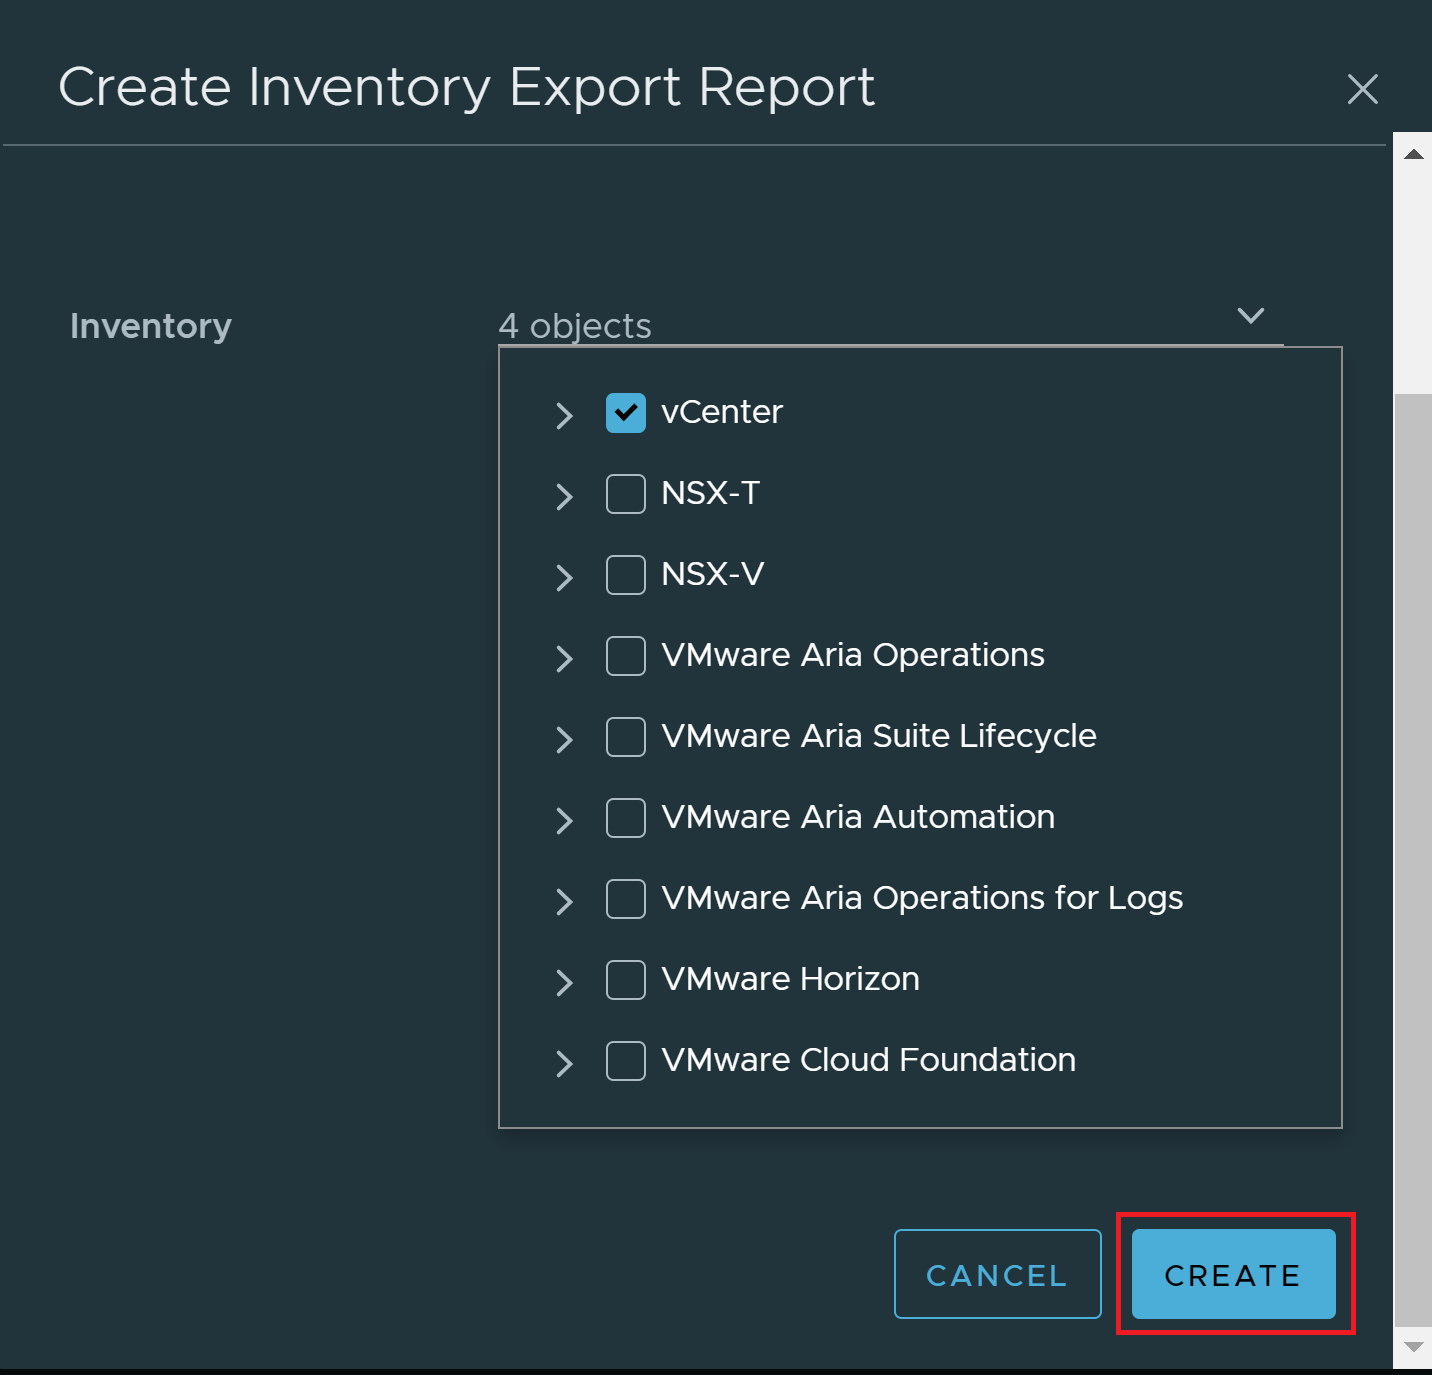 Create Inventory Export Report pop-up is shown. Create button is highlighted.